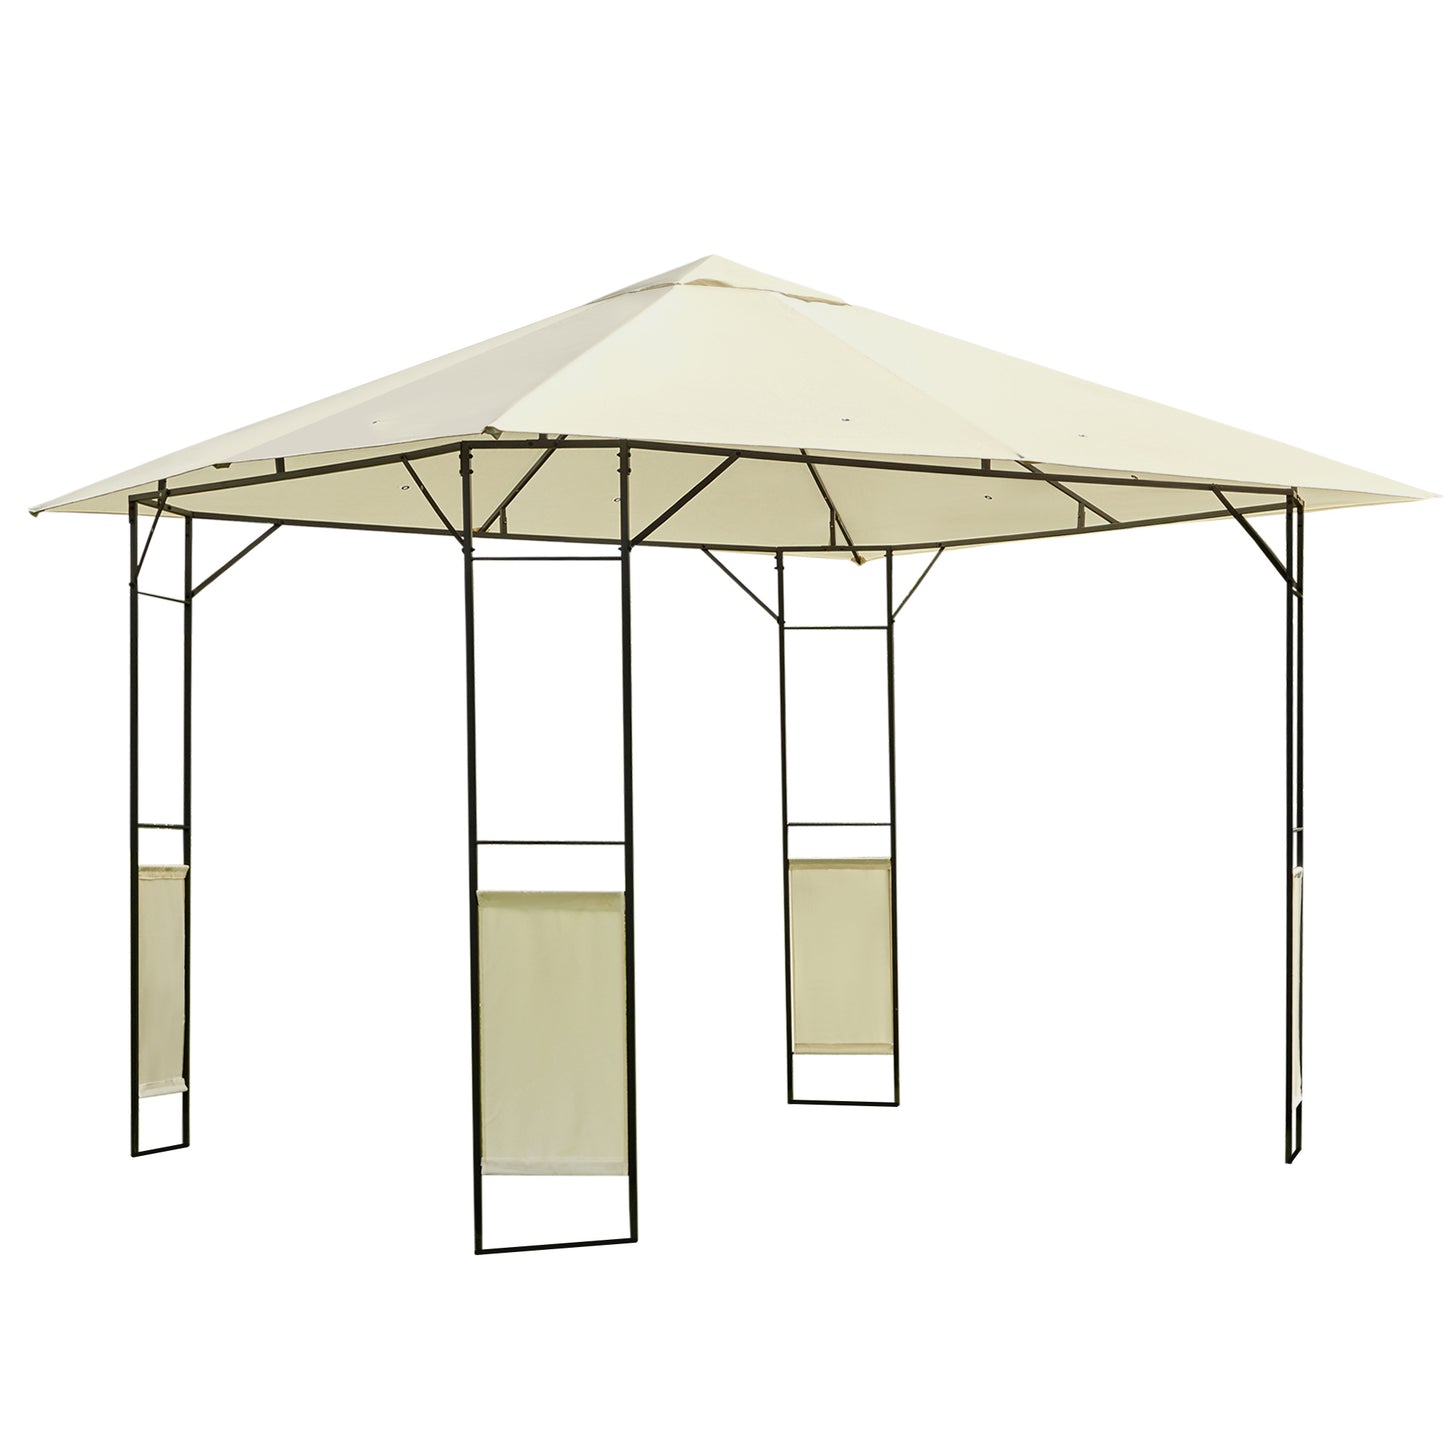 Outsunny 3 x 3 m Garden Metal Gazebo for Party and BBQ w/ Water-resistant PE Canopy Top, Cream - OutdoorBox